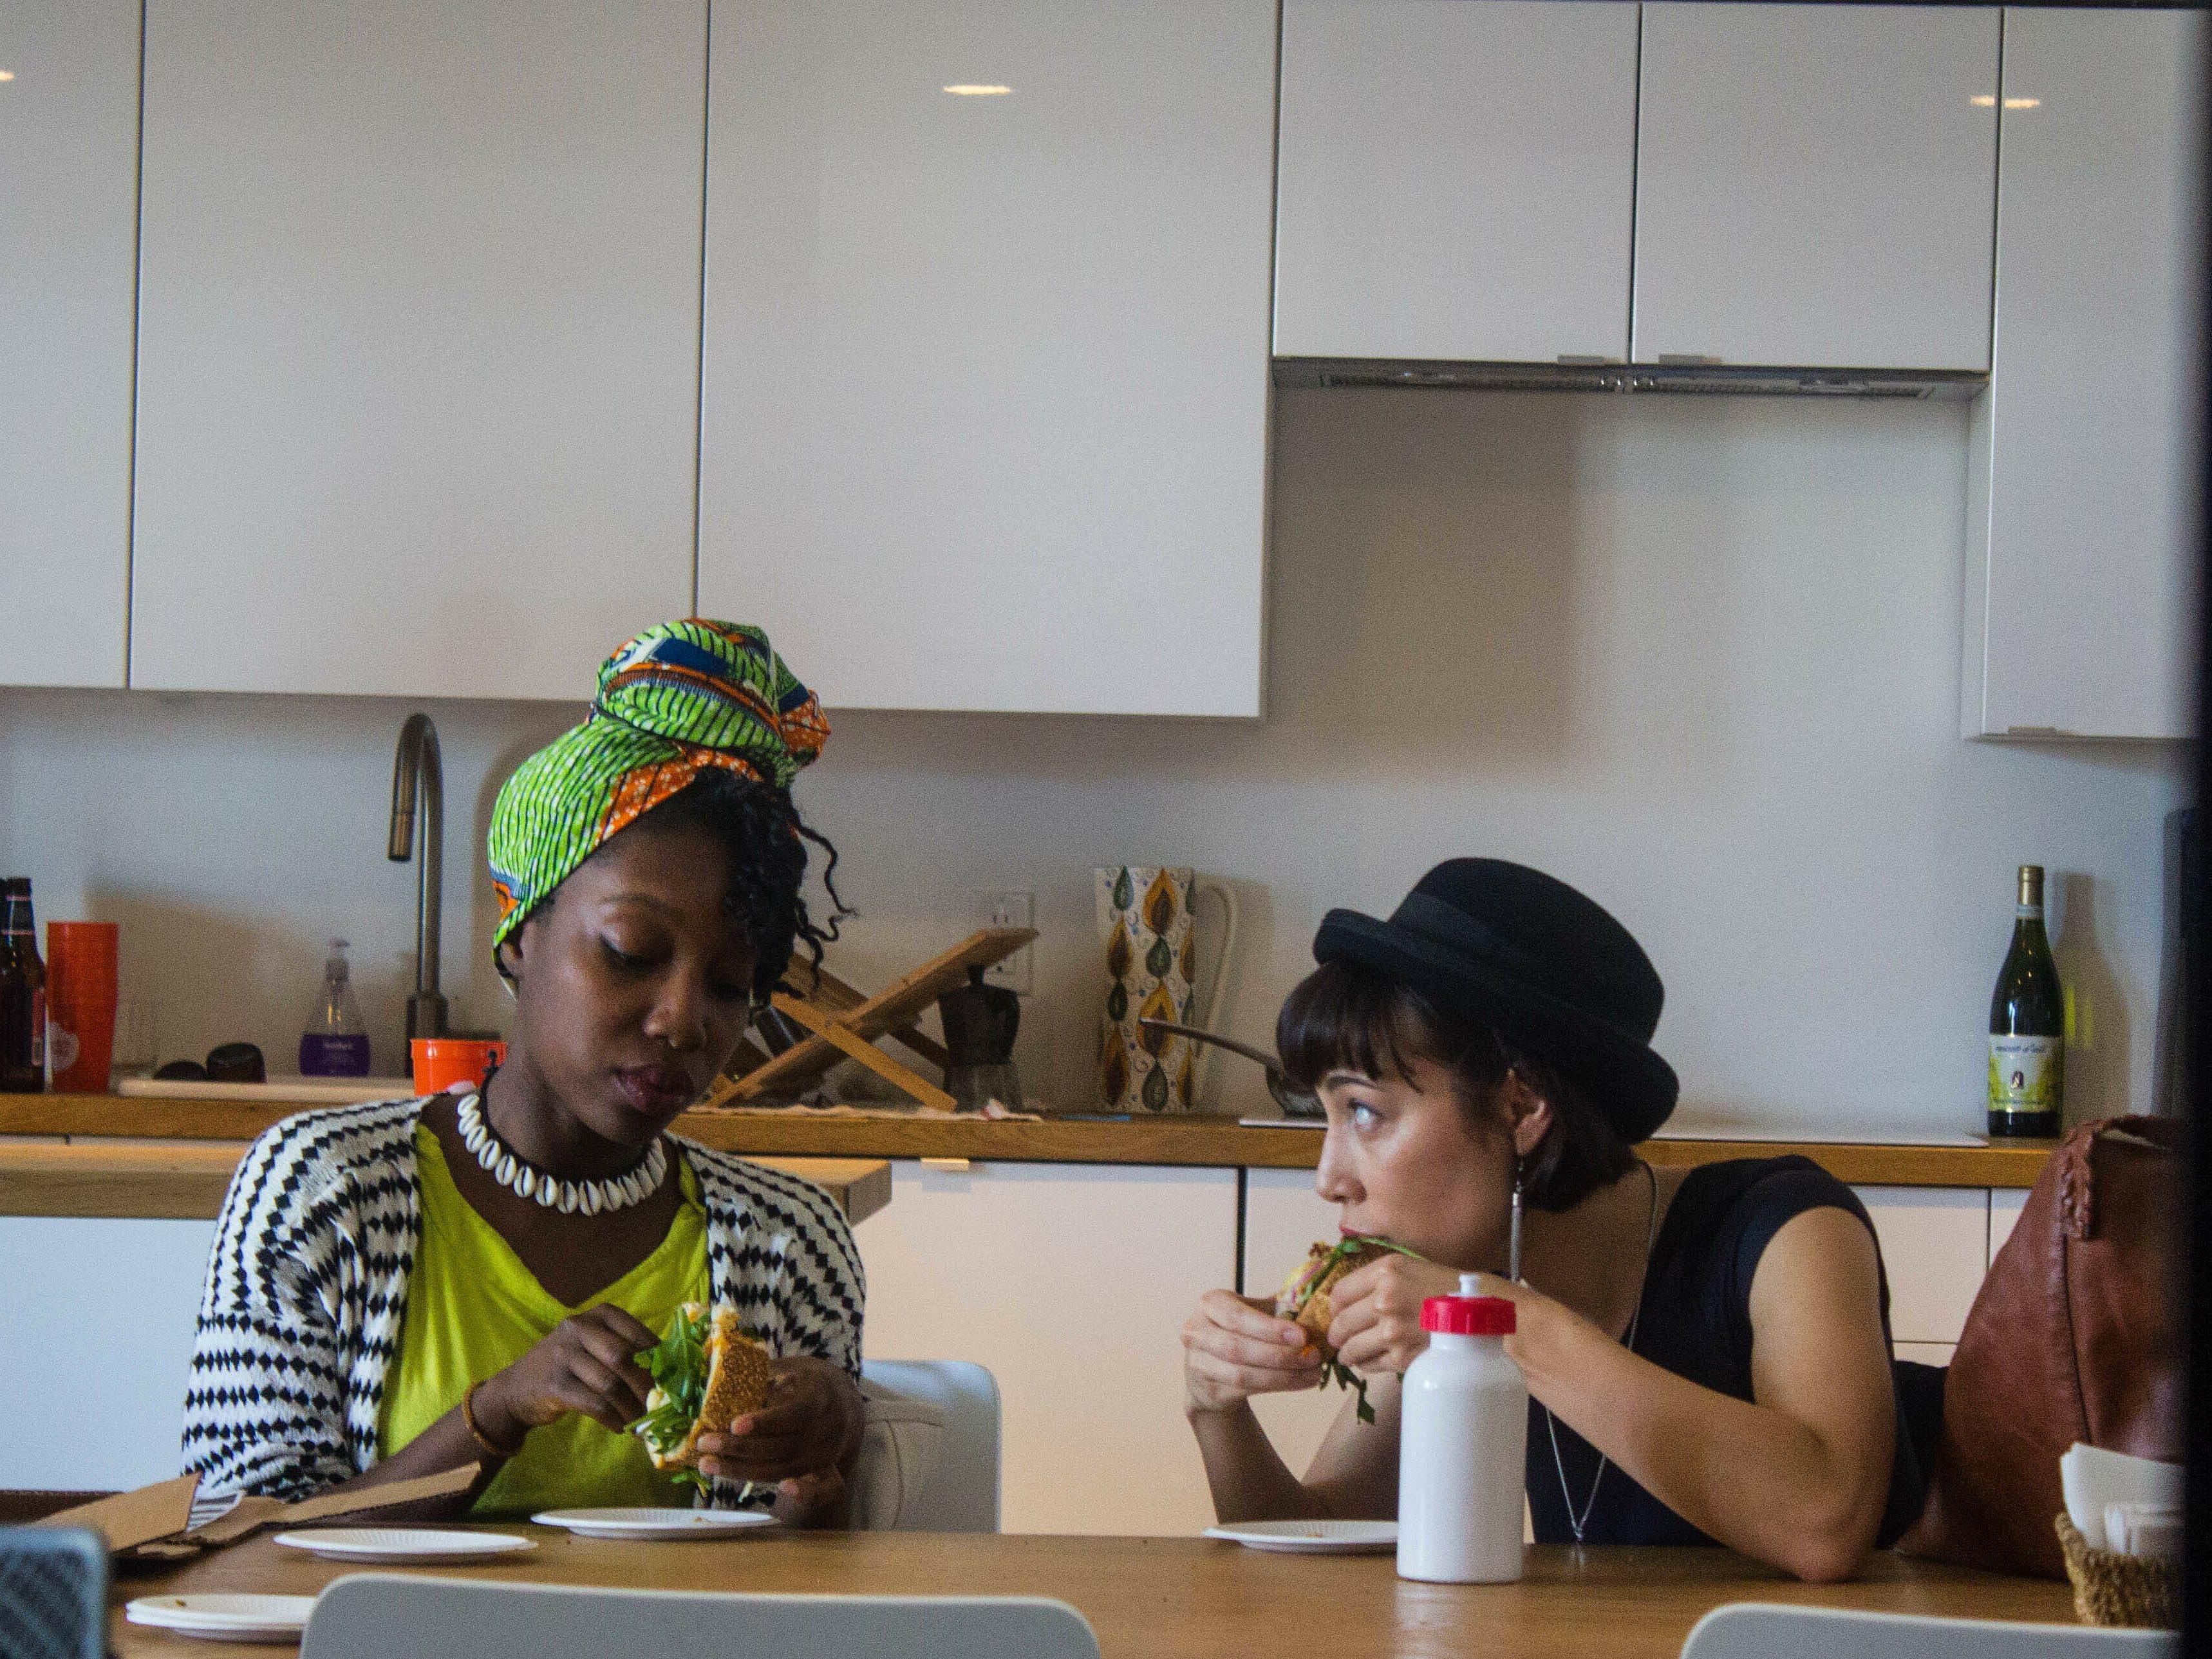 Two people are sitting at a table, eating sandwiches. One person on the left wears a green headscarf and striped cardigan, the other on the right wears a black hat. A white plastic bottle is on the table. The background features kitchen cabinets, a countertop, and utensils.